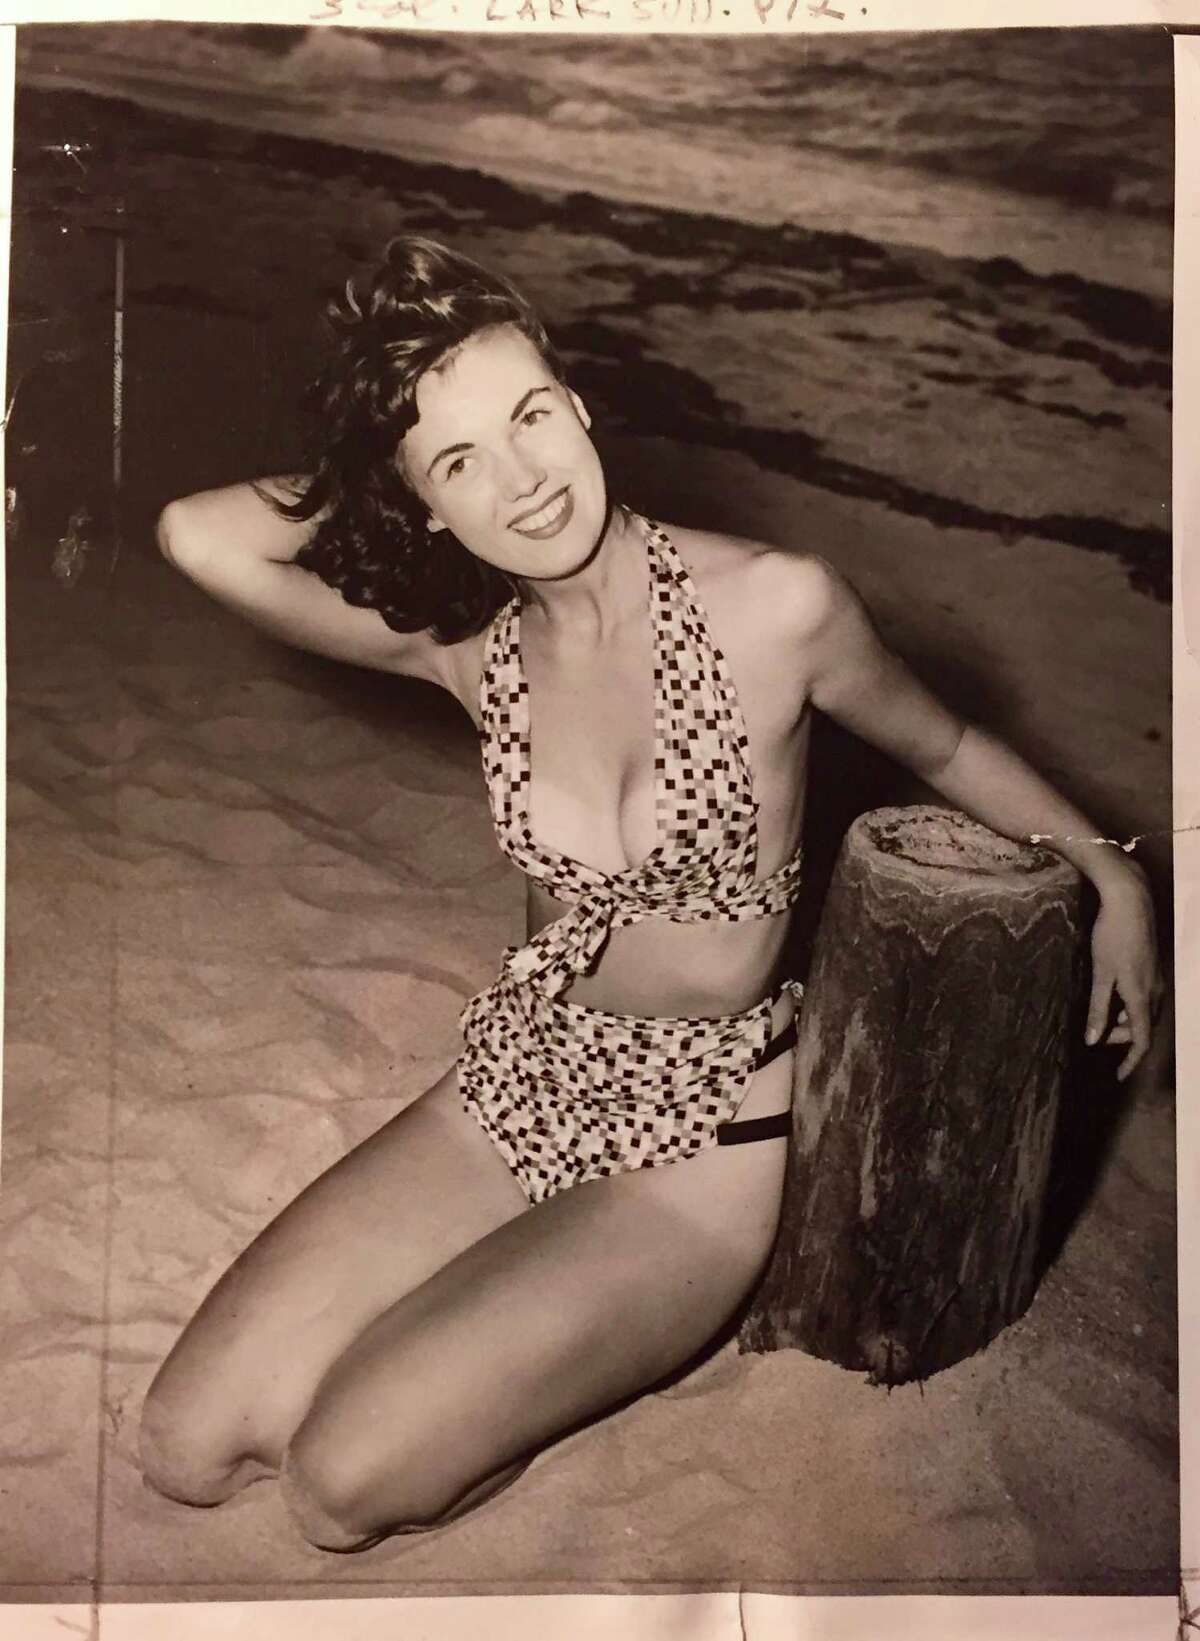 1949 info with photo: Bikini bathing suits are strictly second-rate stuff when you compare them with two of the latest creations of Bunny Yeager, who is shown doing her own modeling here.